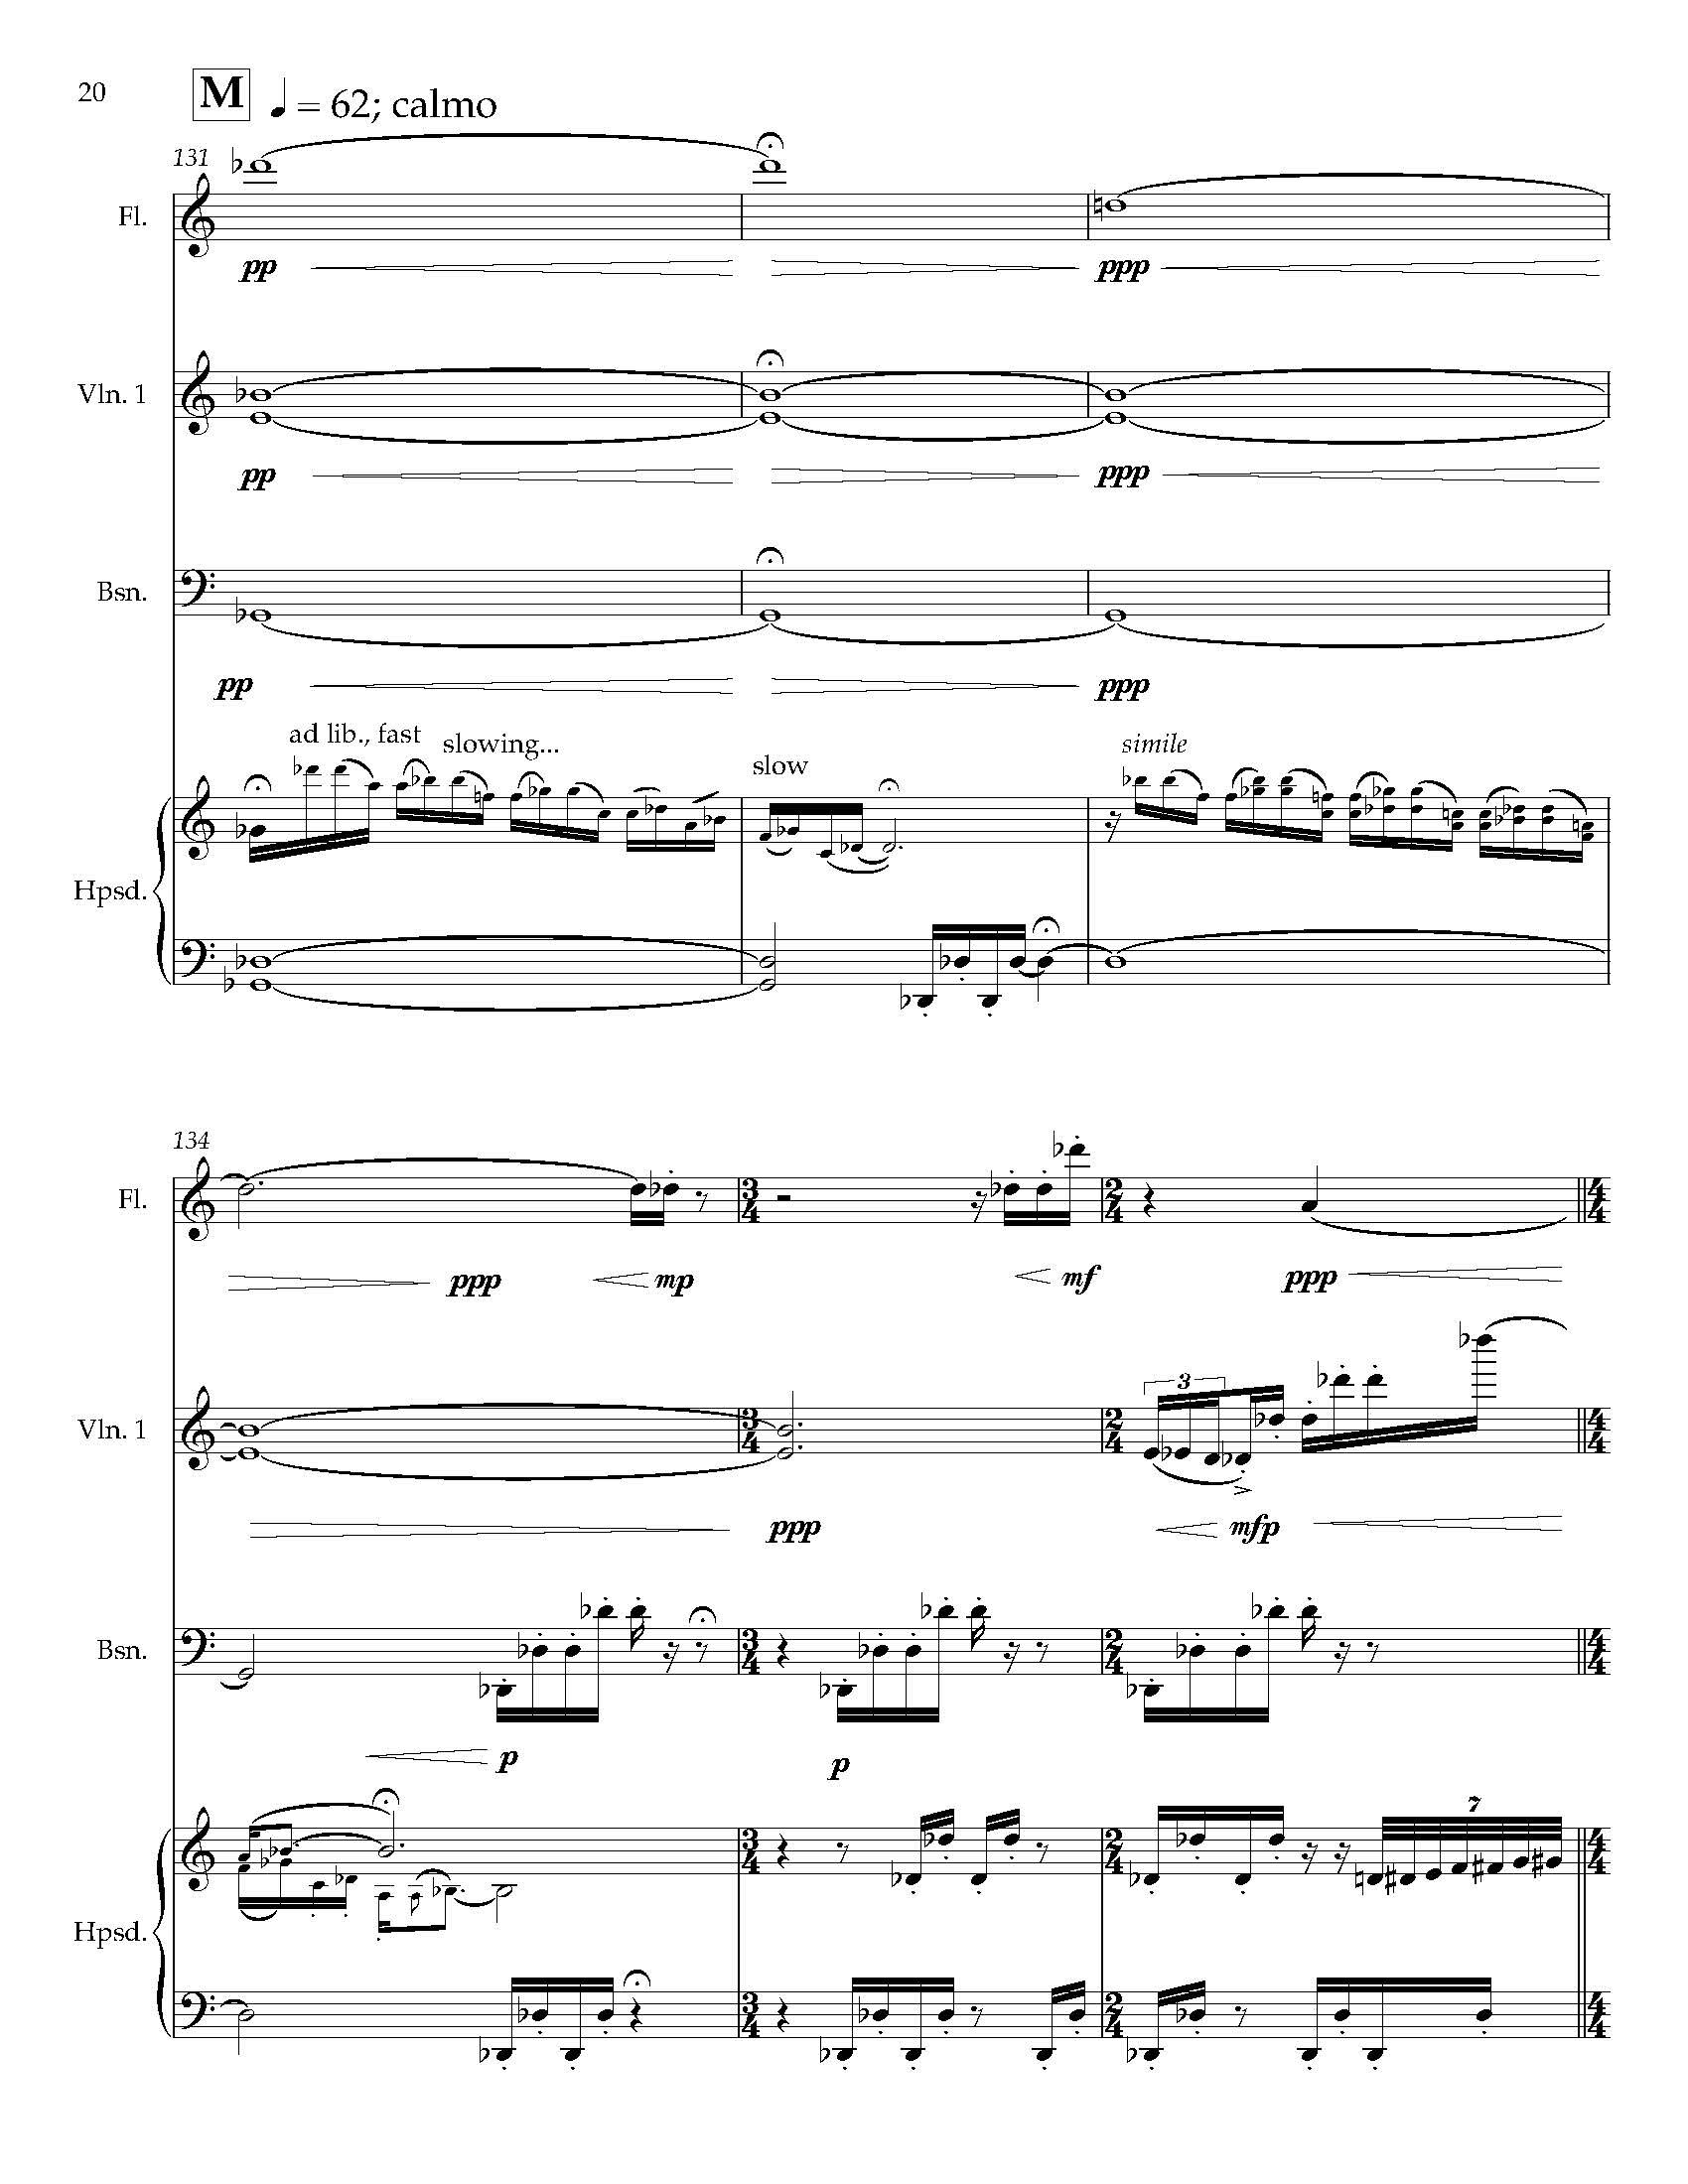 The Hourglass Equation - Complete Score_Page_26.jpg